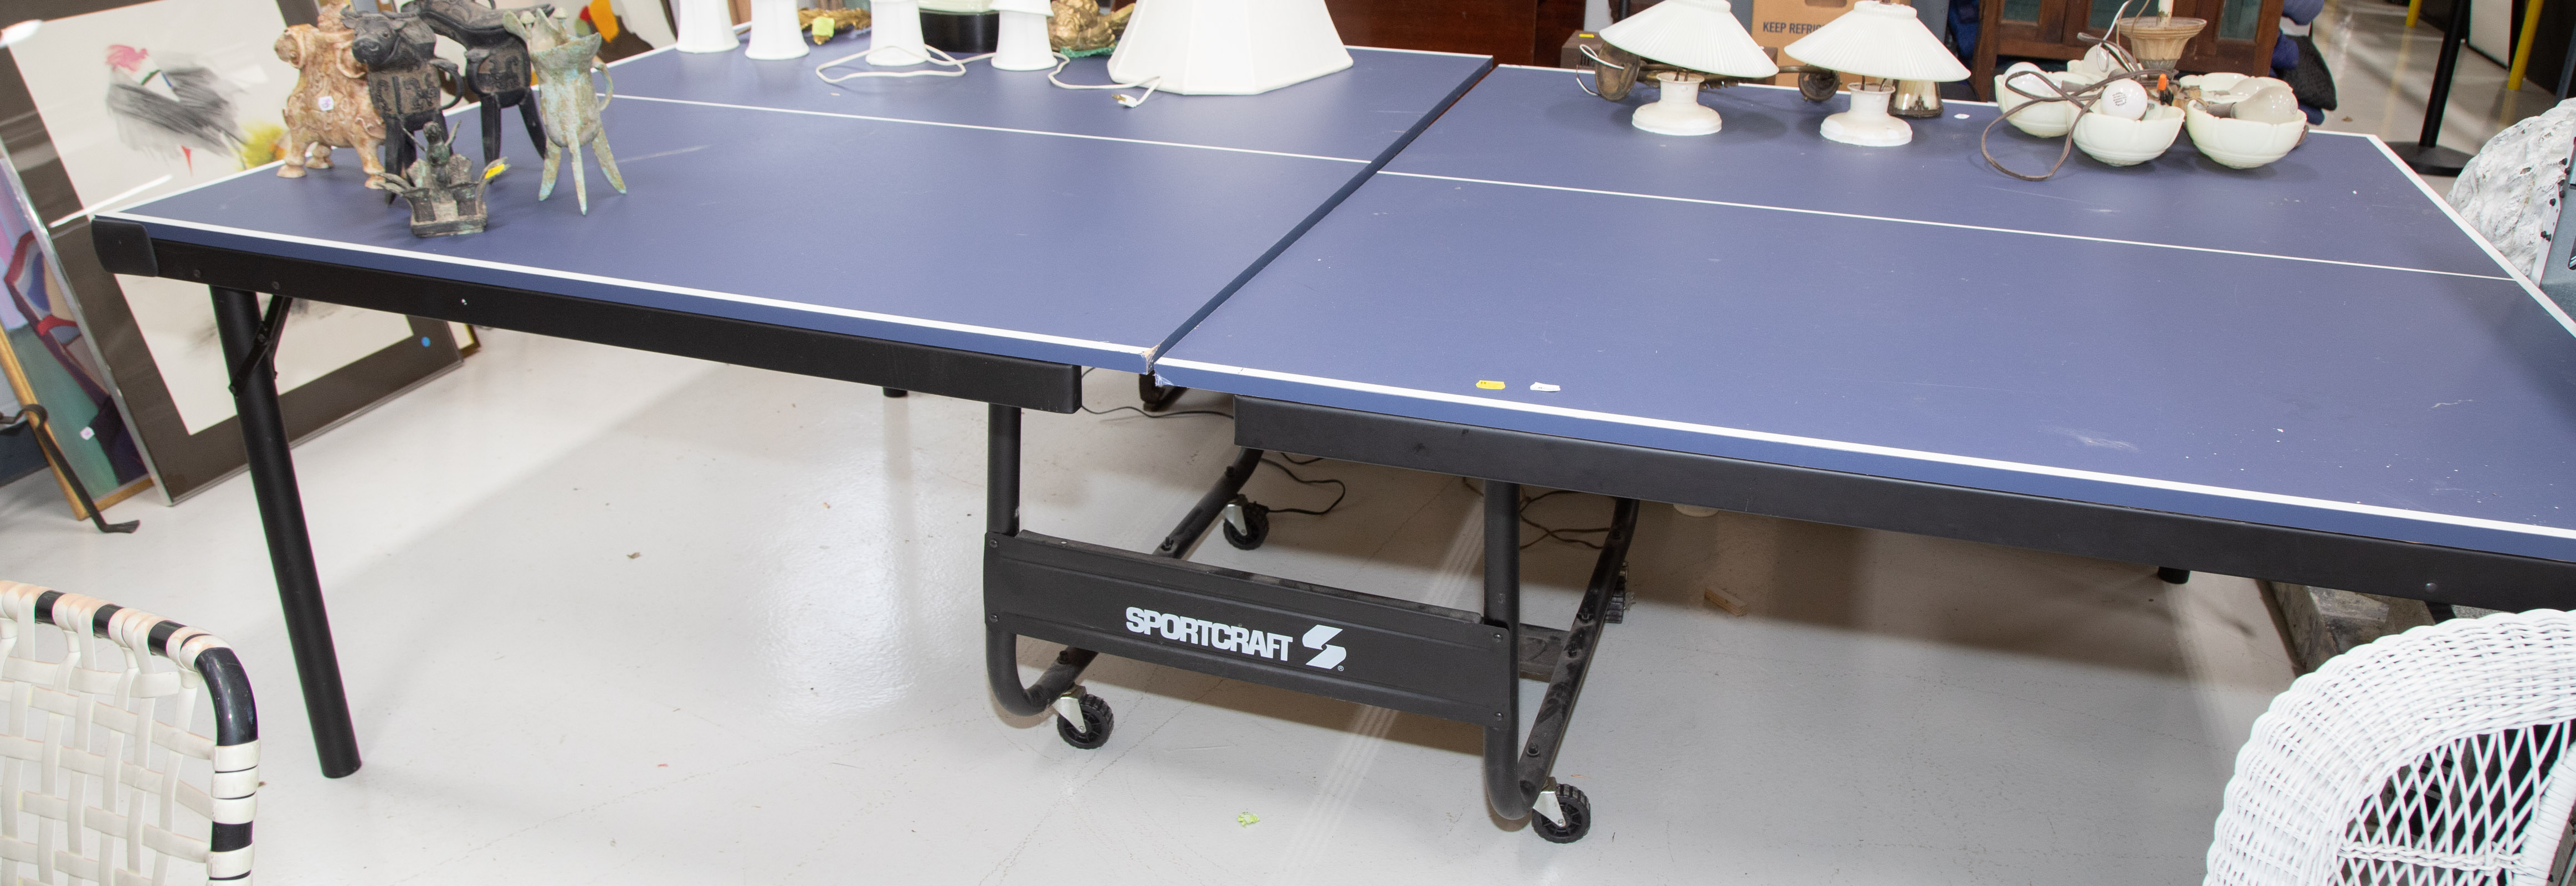 SPORTCRAFT PING PONG TABLE Modern, with